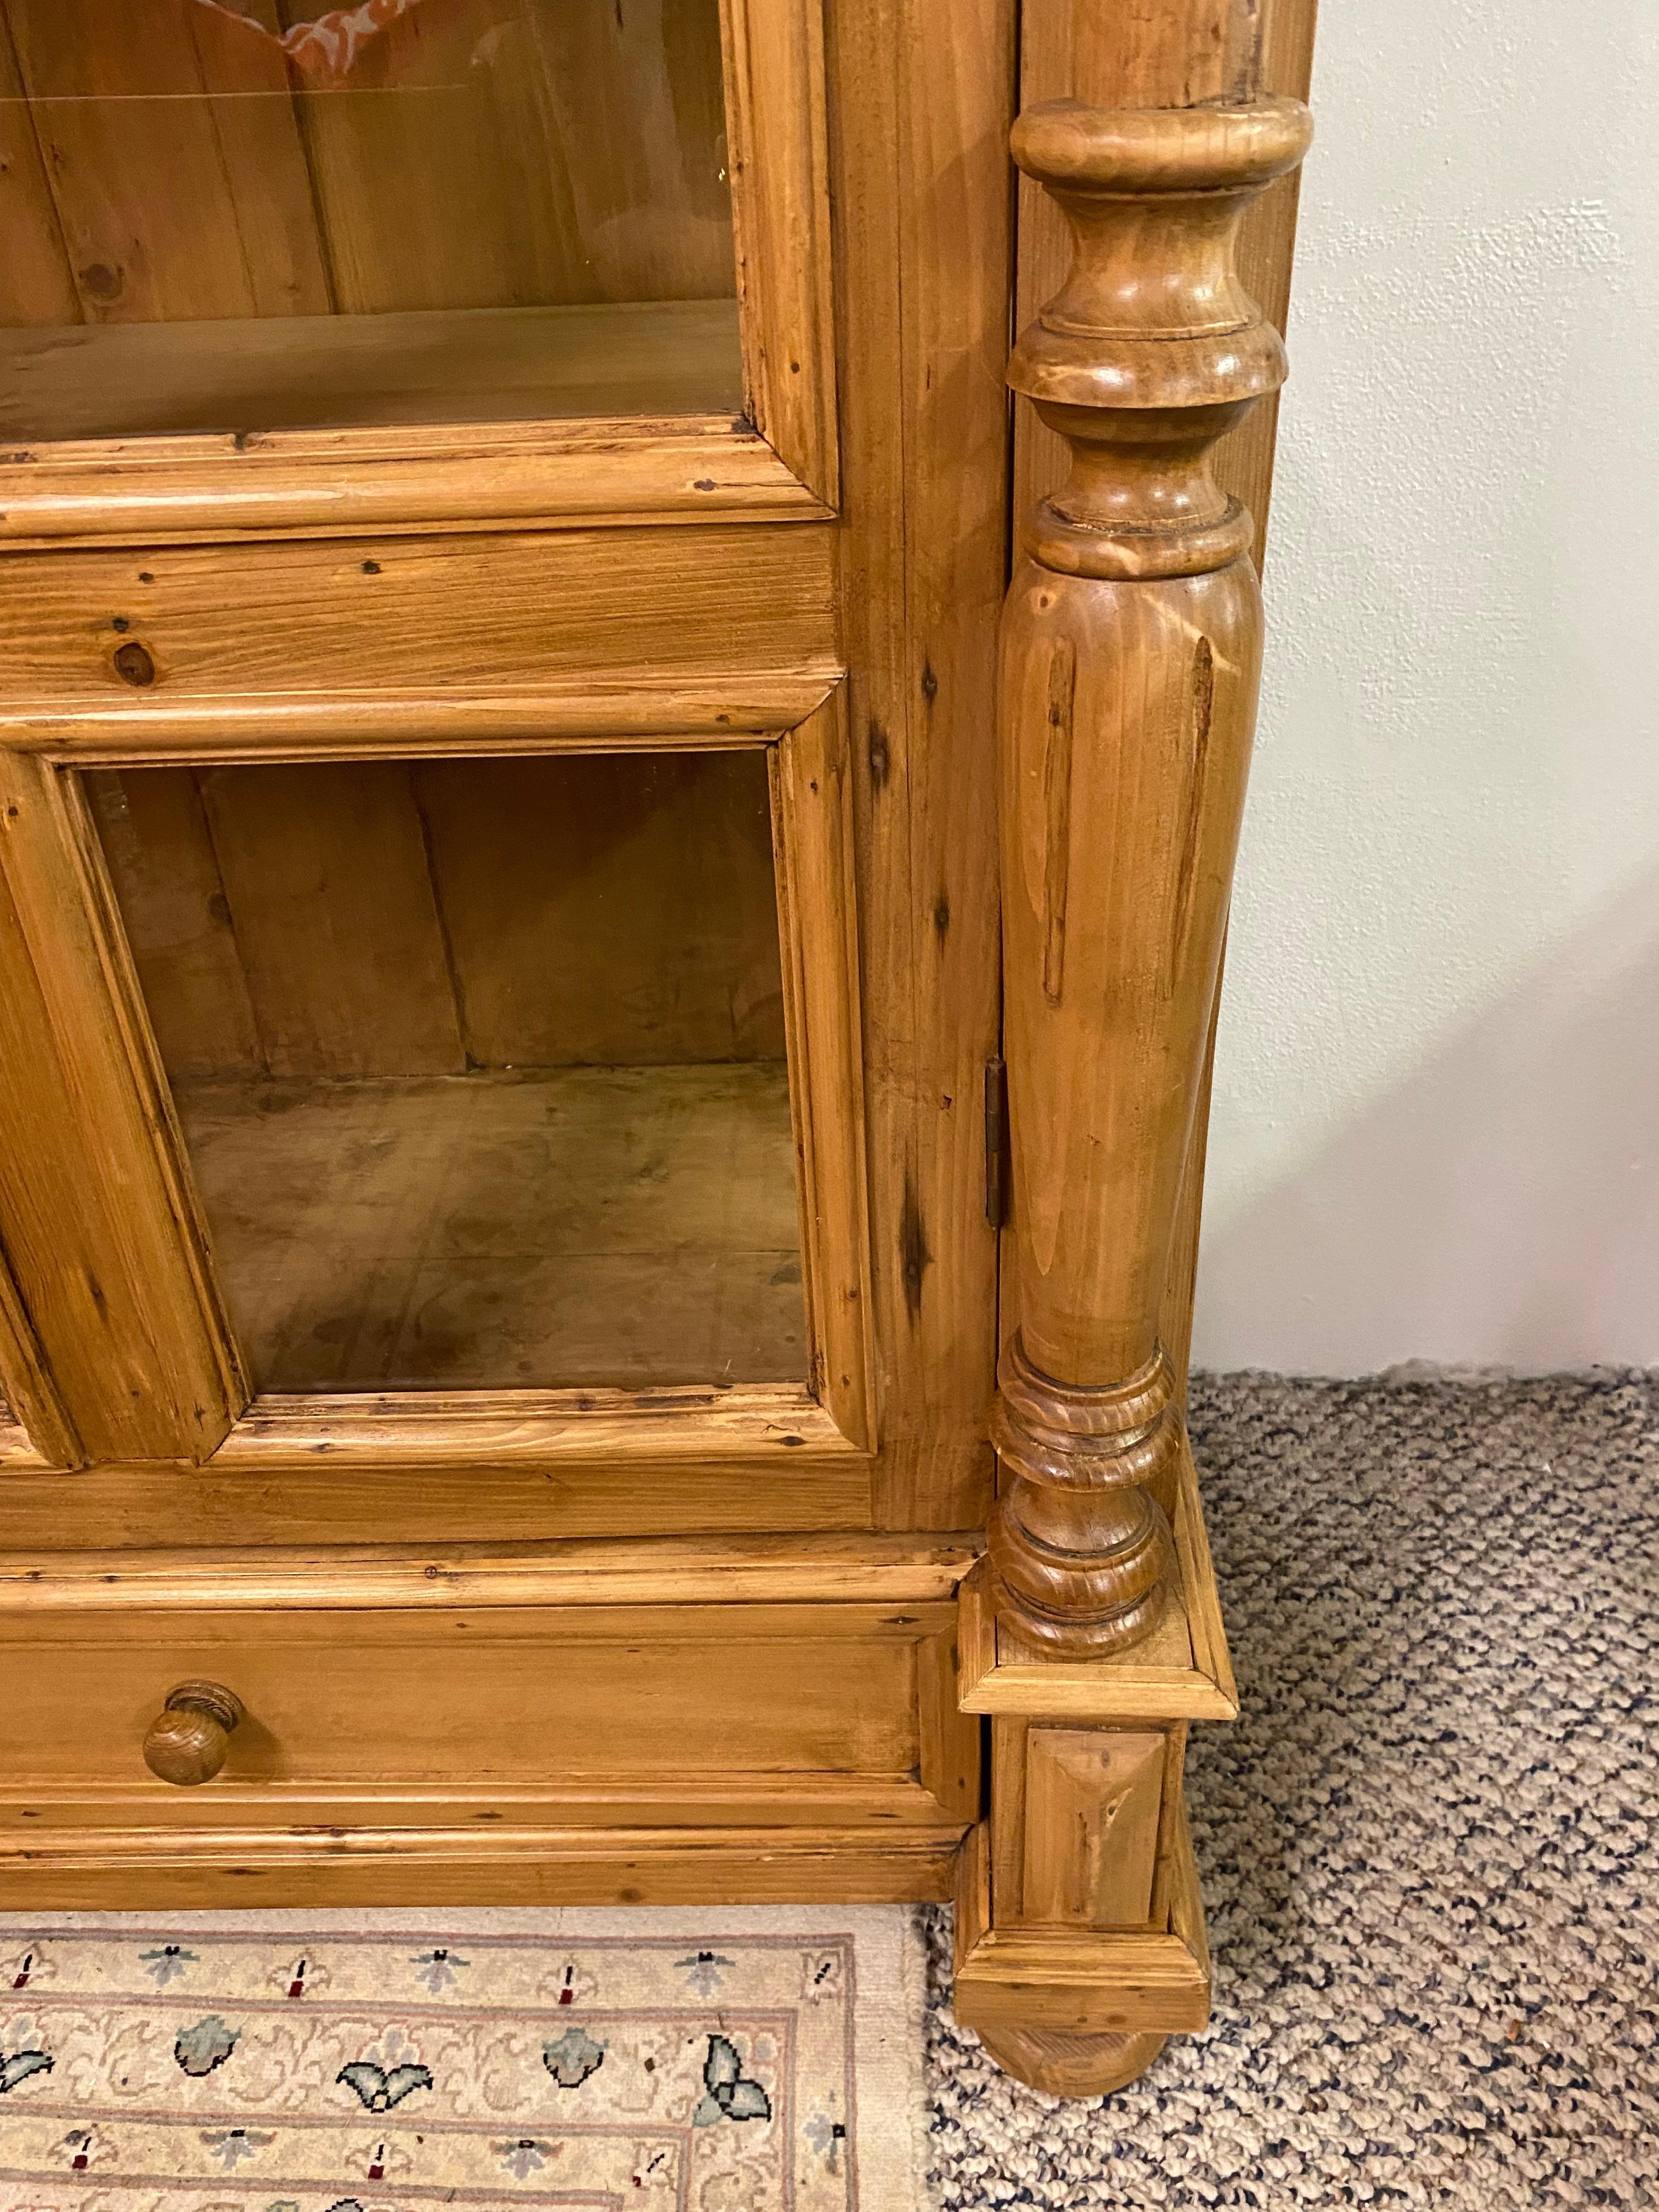 Impressive very large pine cabinet of European origin having glass panes on double doors, decorative crown, and fluted columns. There are three interior shelves plus two drawers side by side at the bottom of the cabinet which provide wonderful